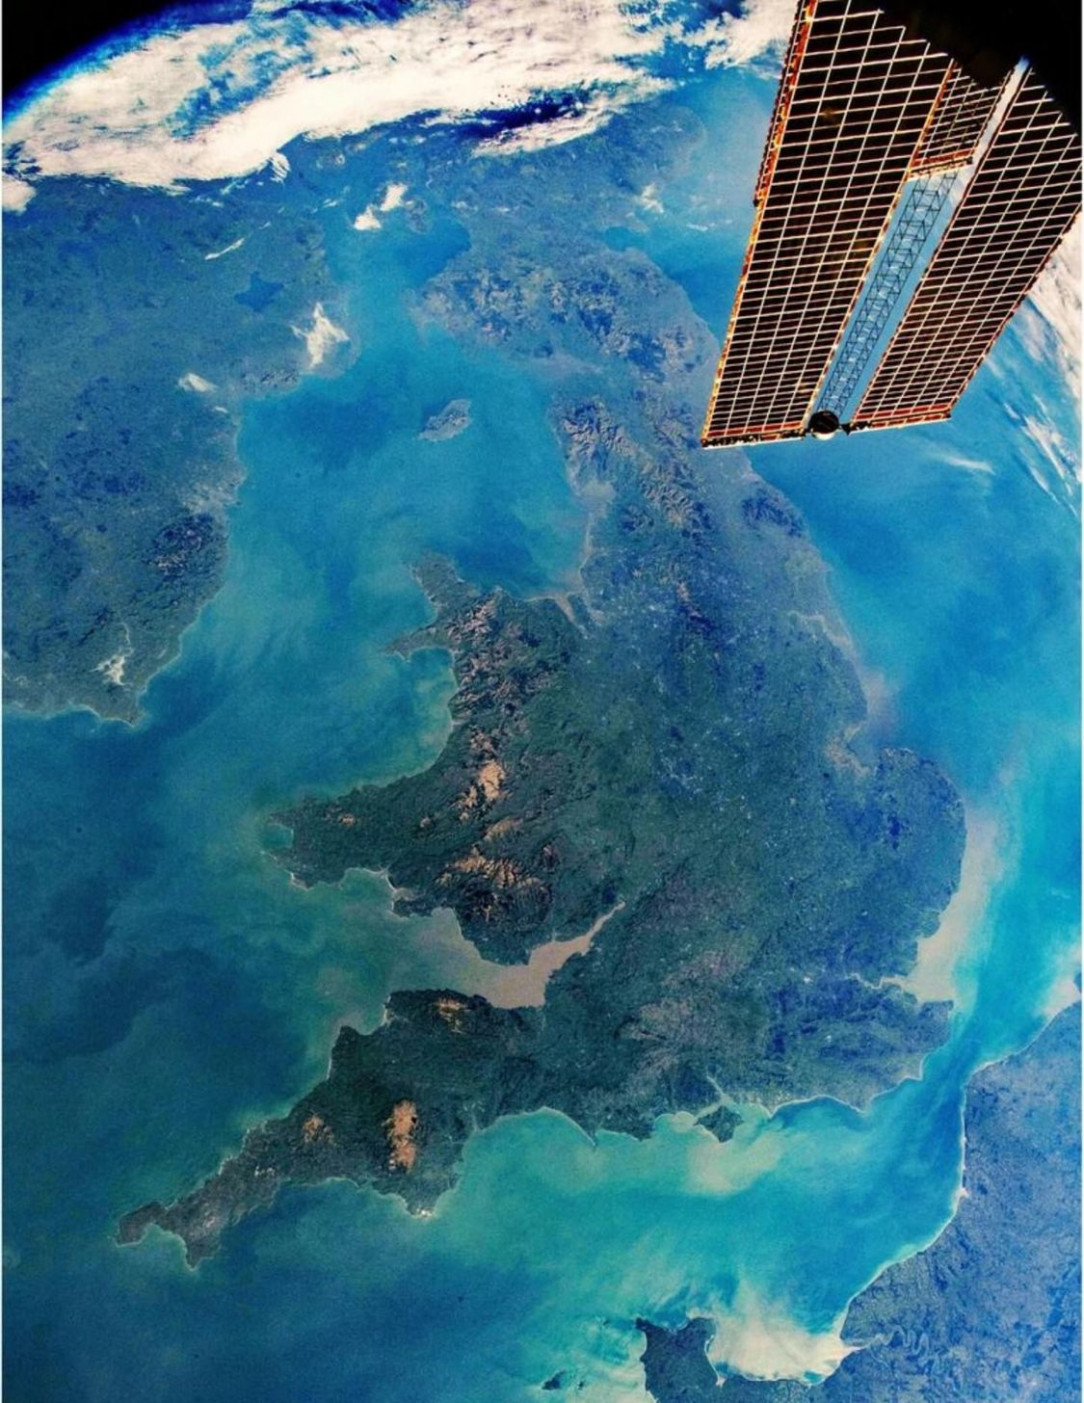 The photo was snapped from low orbit as the ISS travelled past on February 26. The spacecraft’s altitude was 214 nautical miles away from Earth, about the same distance it takes to drive from central London to Manchester by car via the M40